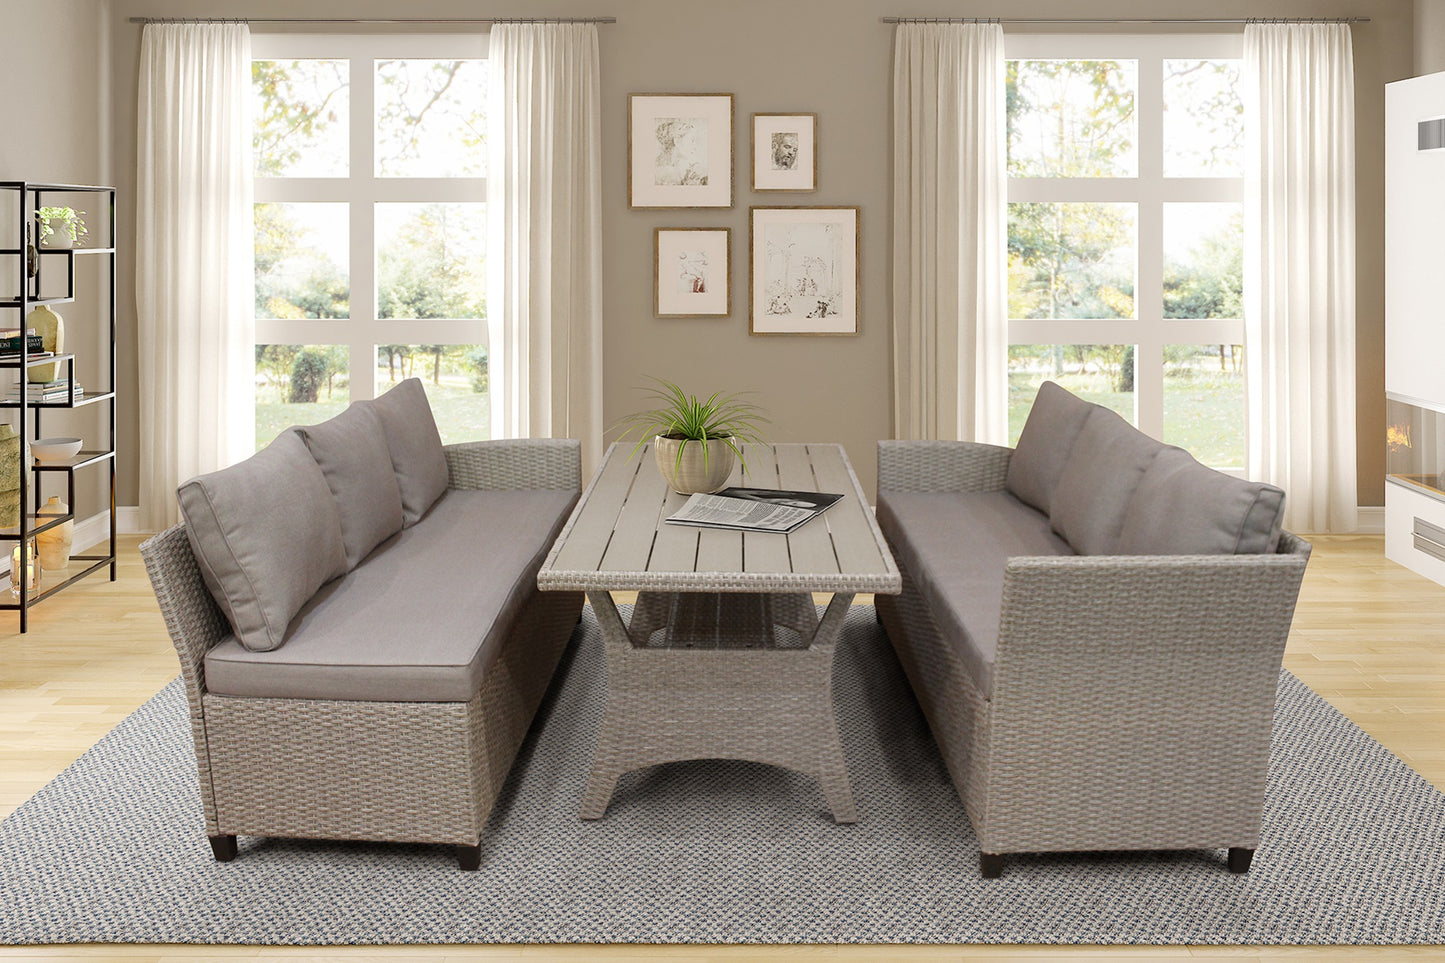 1st Choice Functional All-Weather Sectional Sofa Set with Table & Soft Cushions